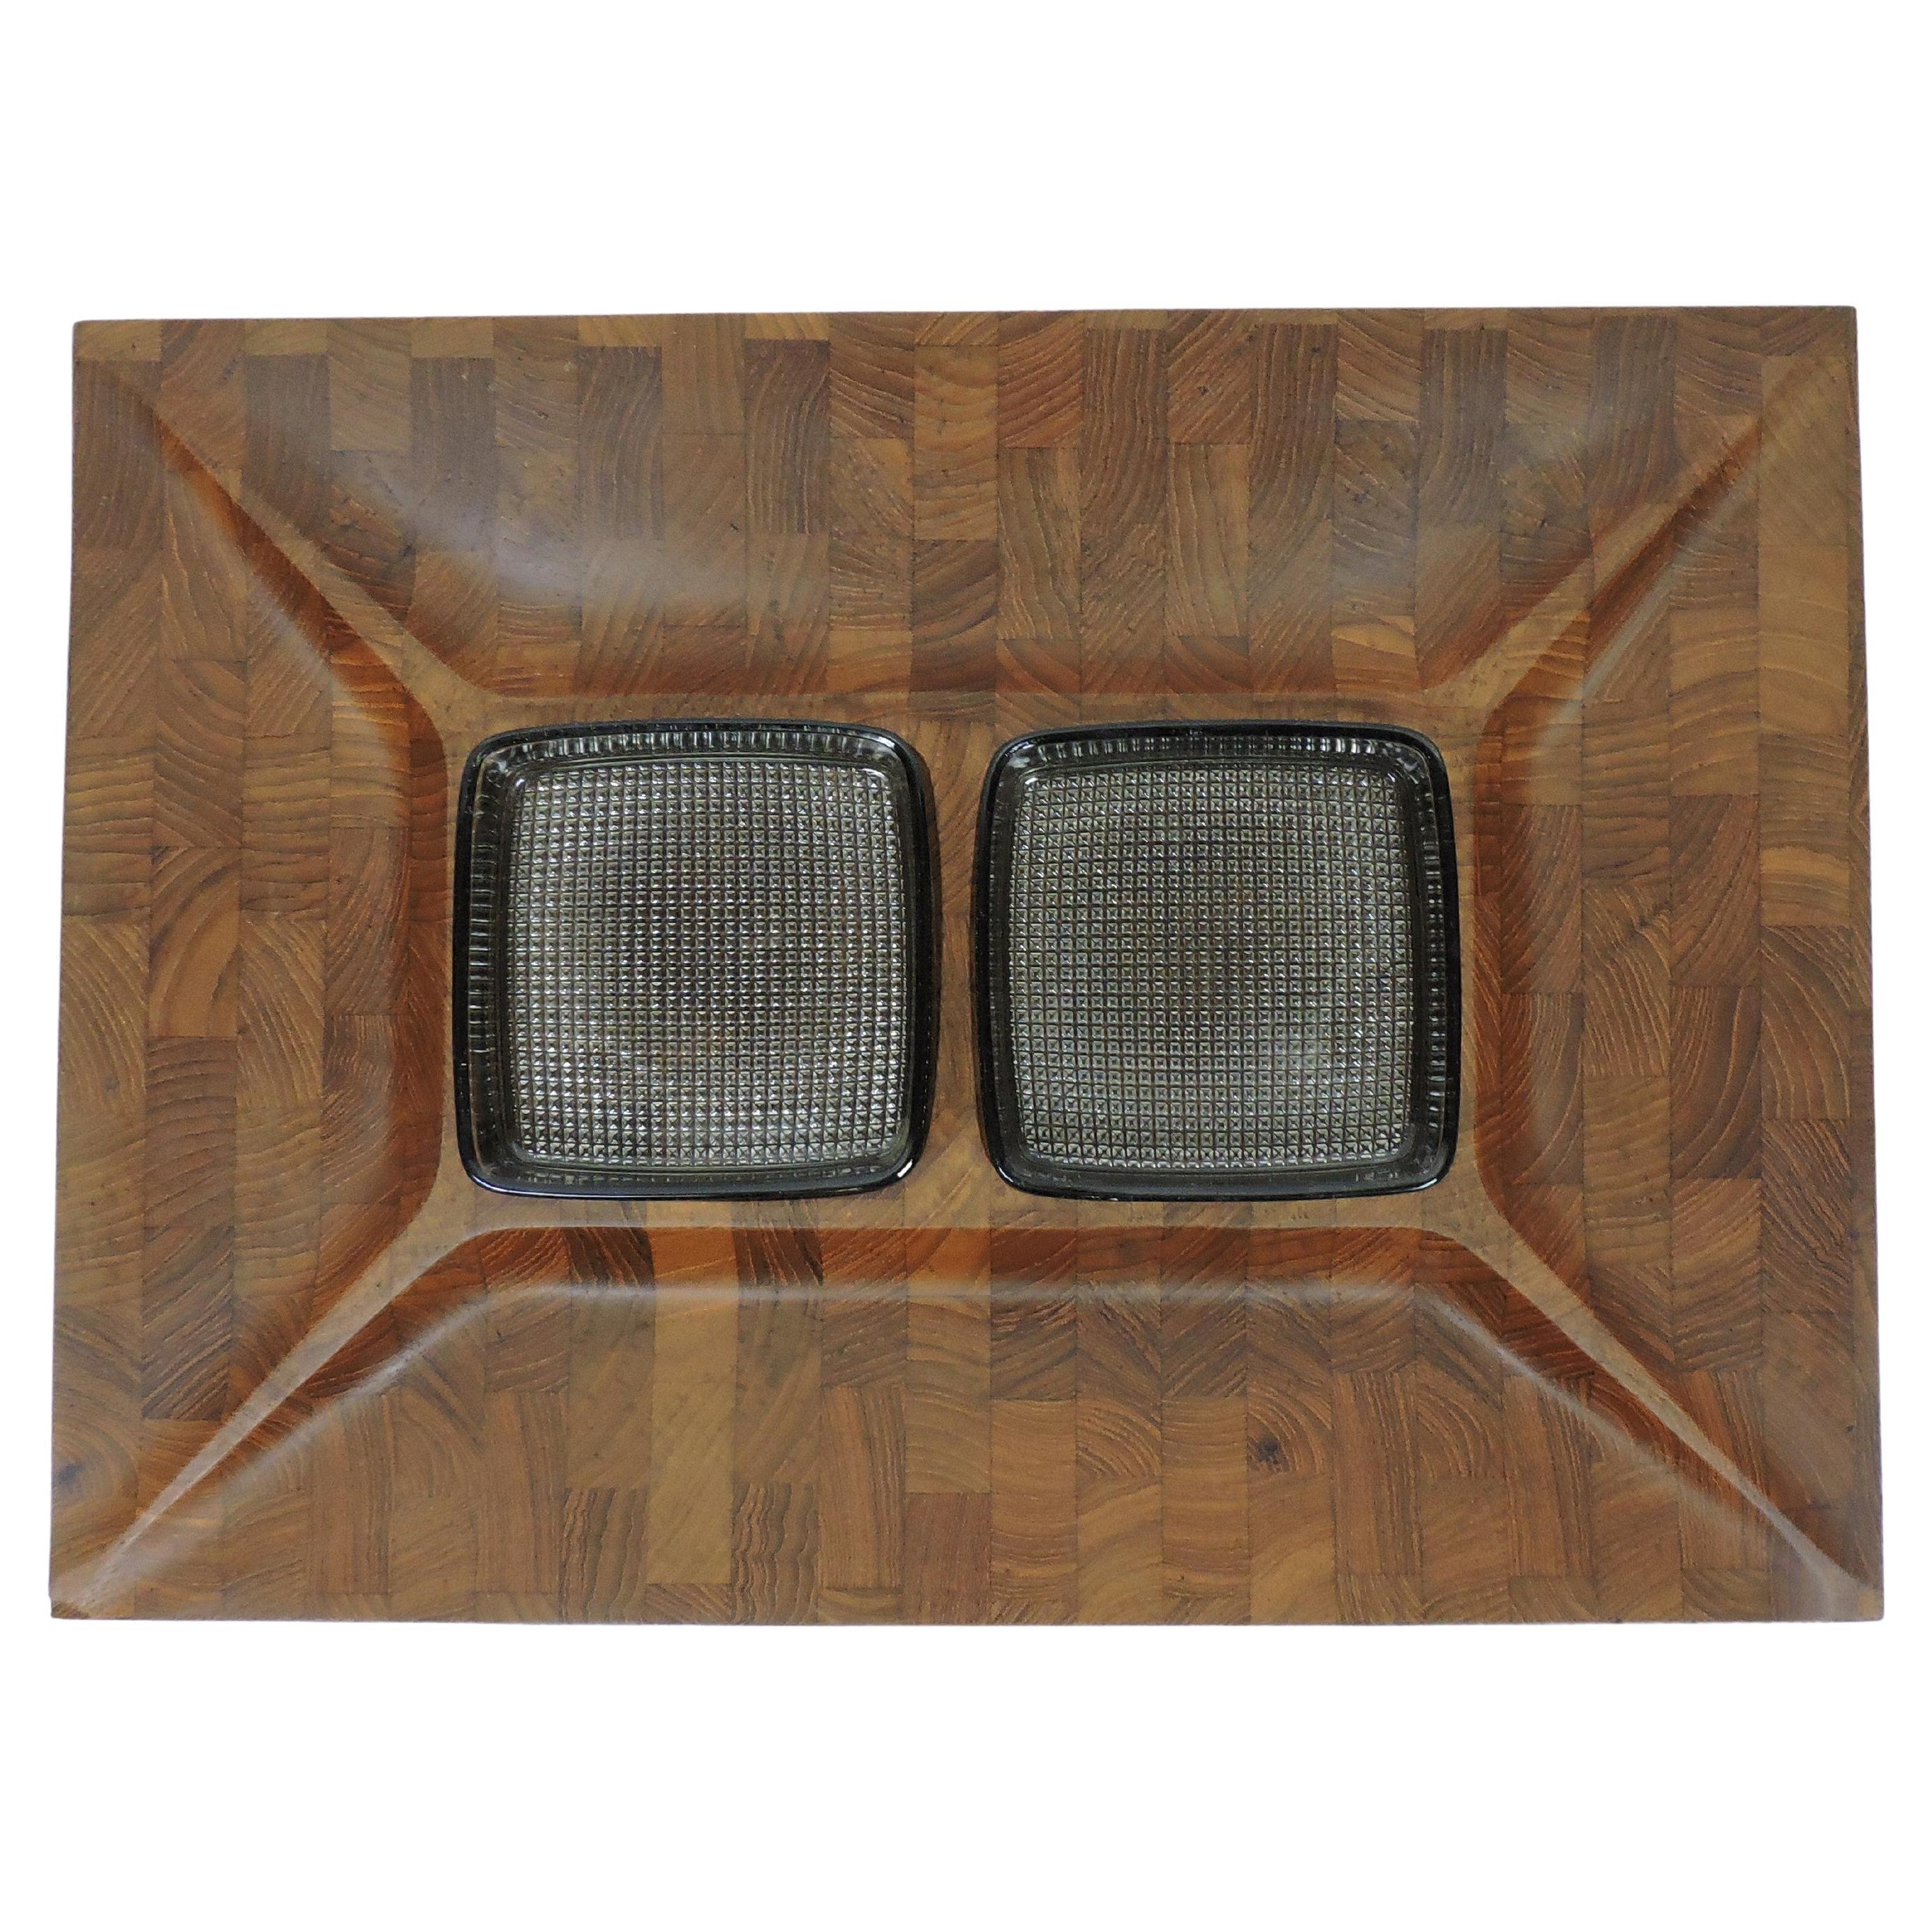 Digsmed Large Danish Modern Divided Teak Tray with 2 Glass Inserts For Sale